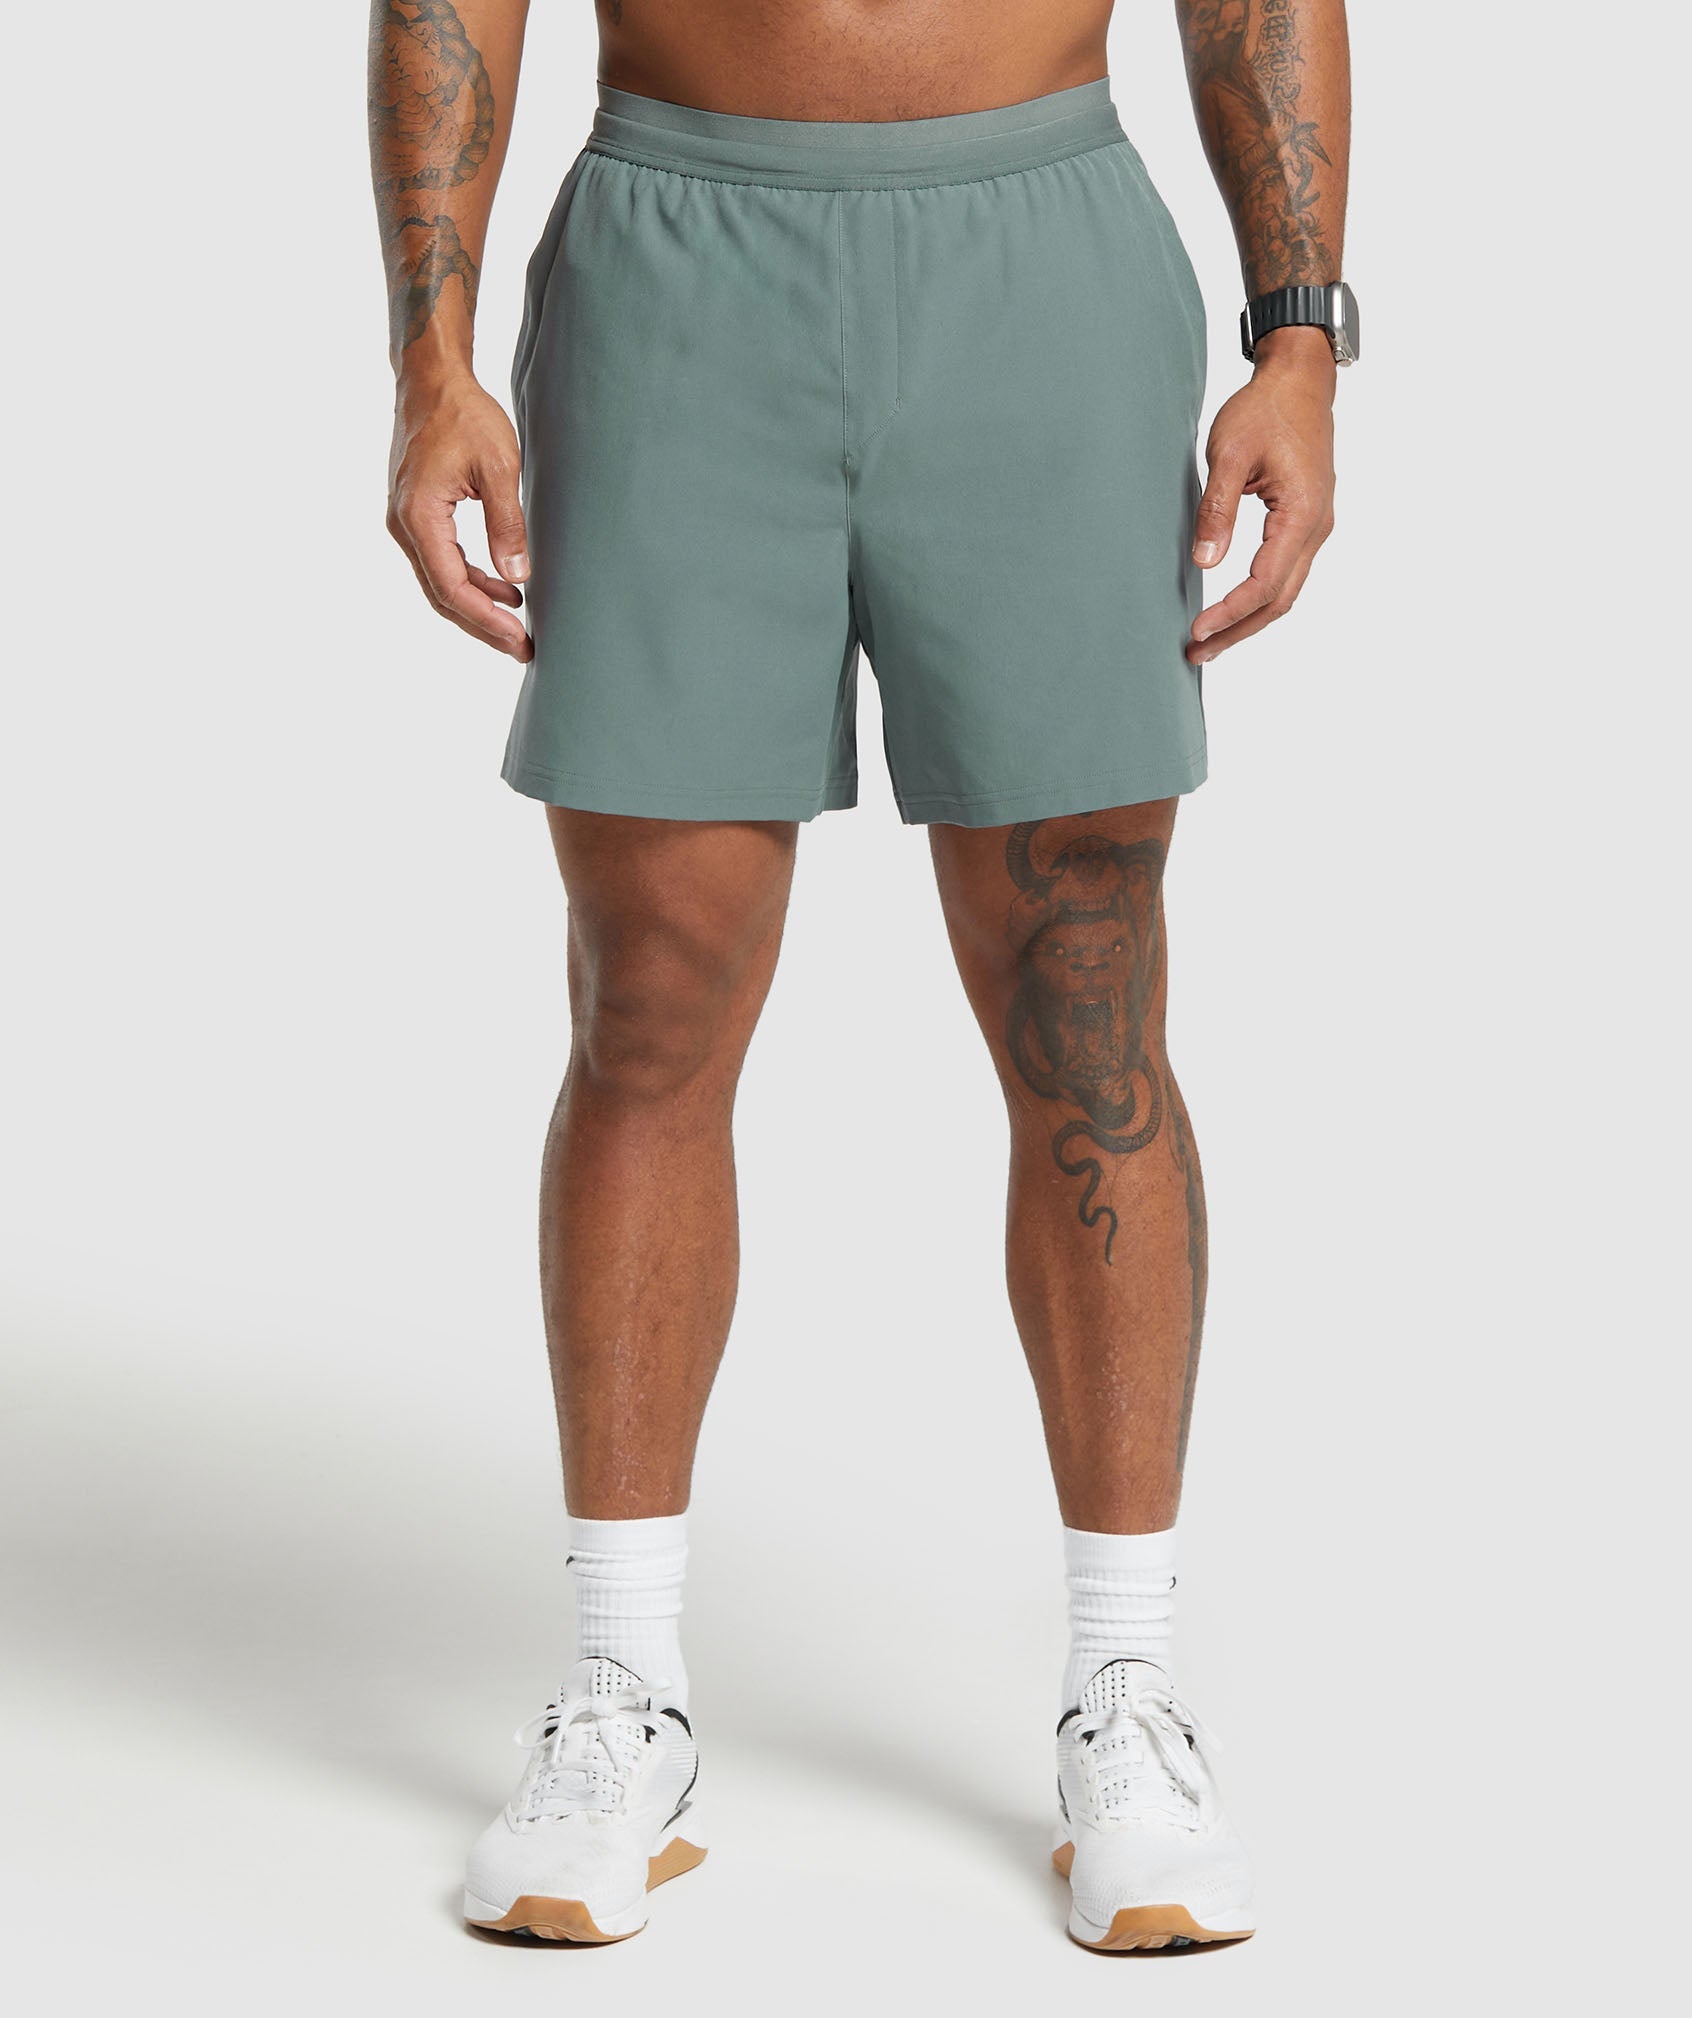 Land to Water 6" Shorts in Cargo Teal - view 1